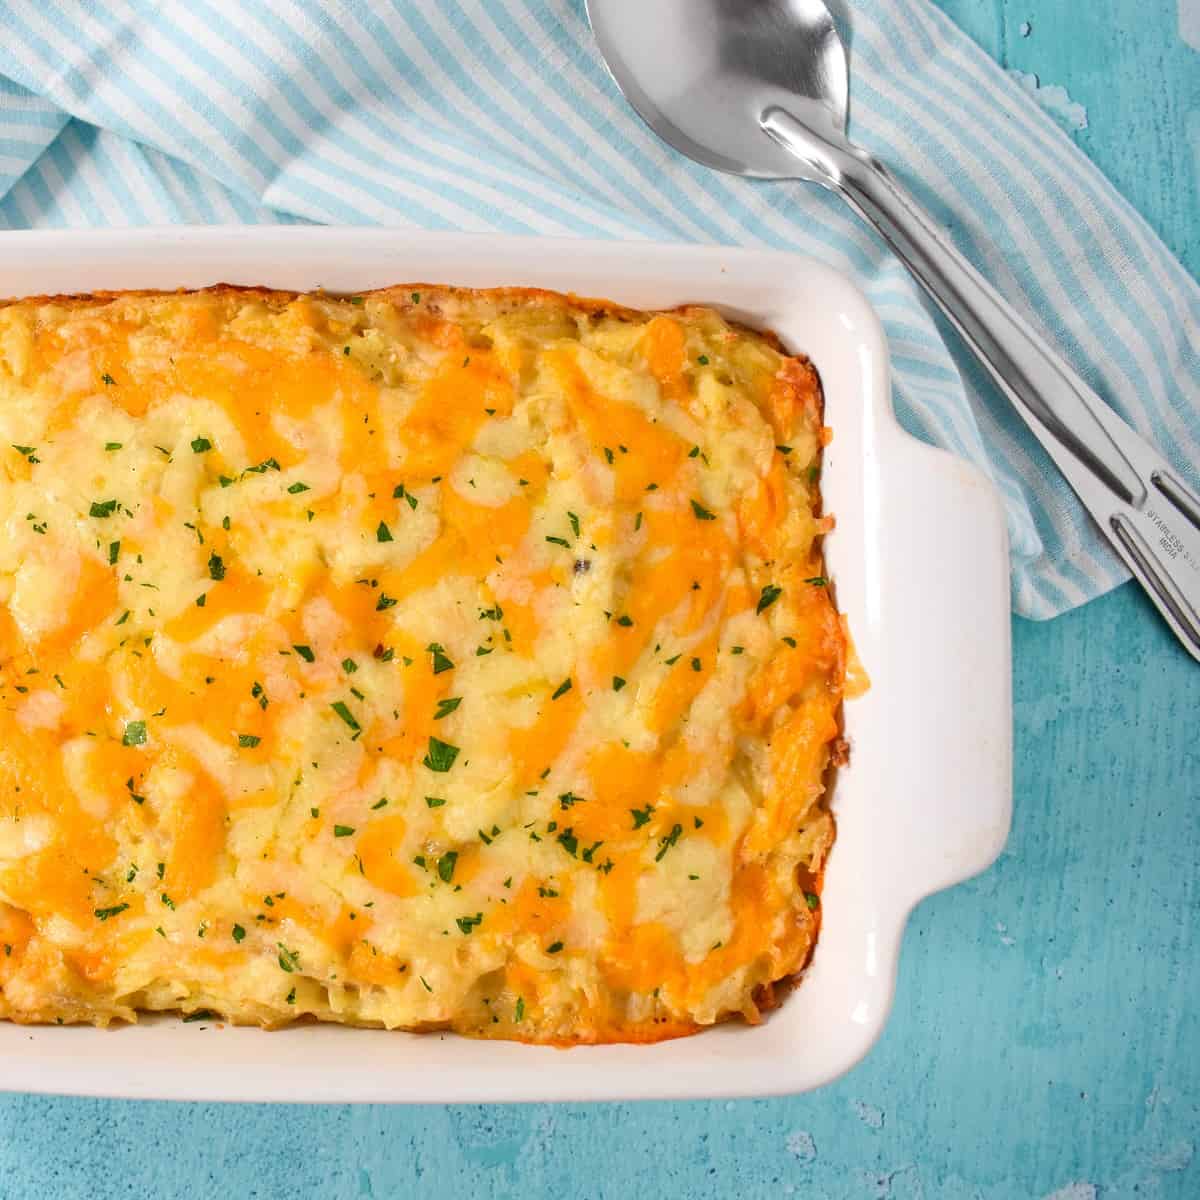 An image of the baked hash brown casserole set on a light blue table with a light blue and white striped kitchen towel and large serving spoon.